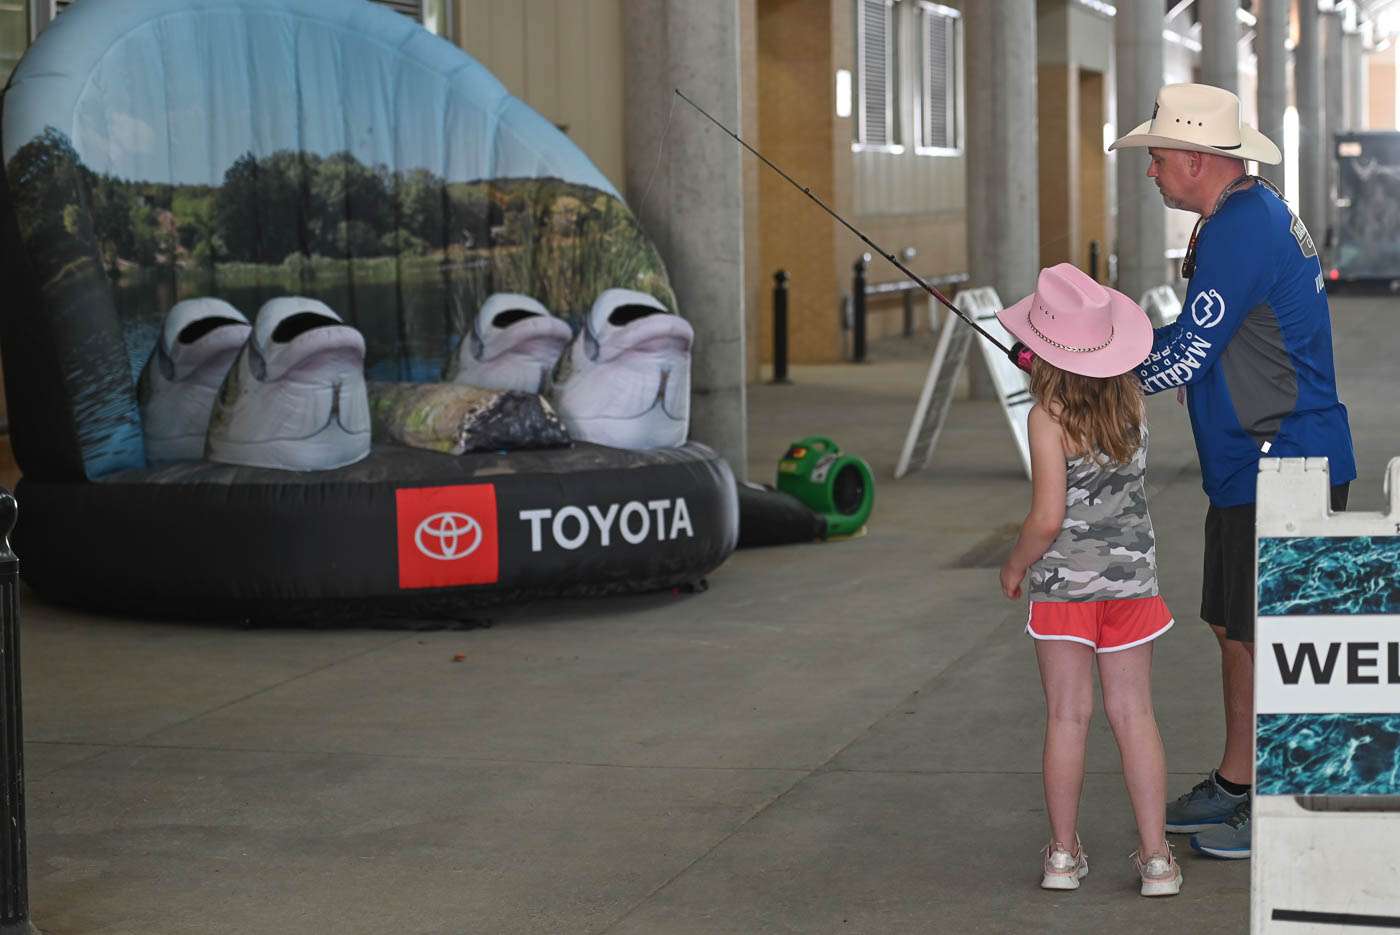 Practice your casting skills and meet and greet with Elite anglers with Toyota!